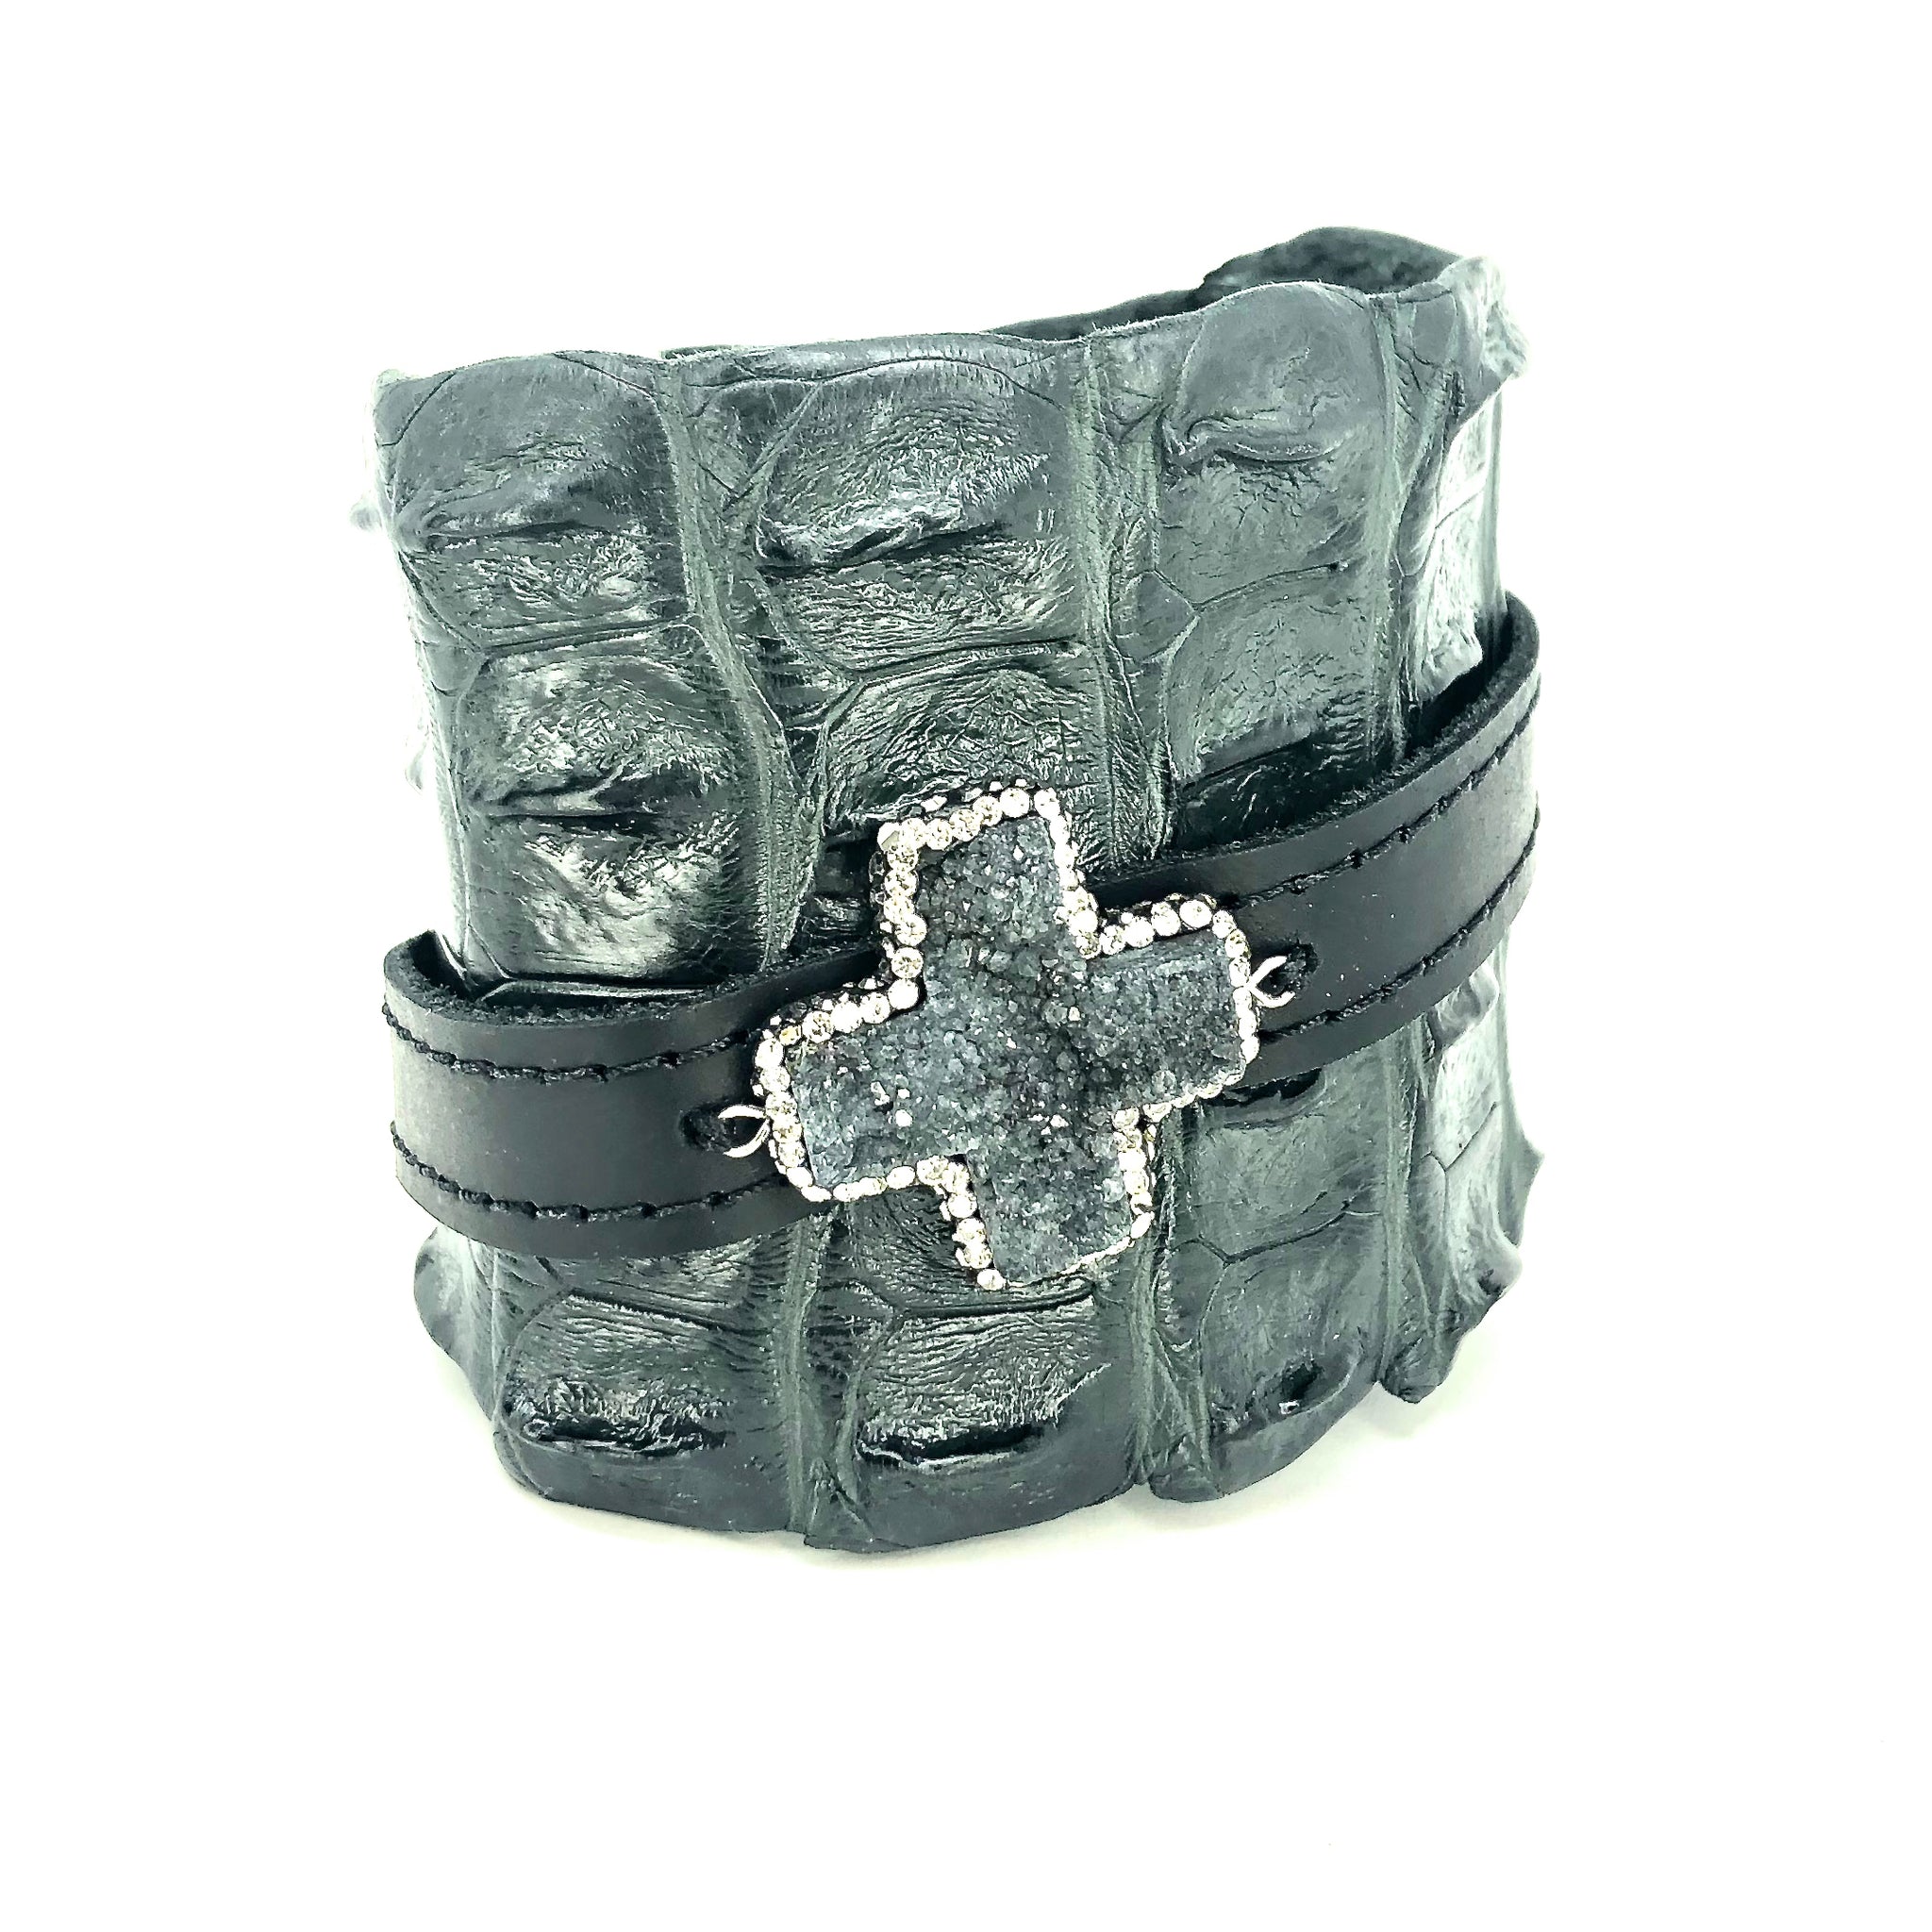 FARM-RAISED CROCODILE LEATHER CUFF WITH PAVE RHINESTONES ADORNMENT AND ADJUSTABLE BUCKLE. by nyet jewelry.